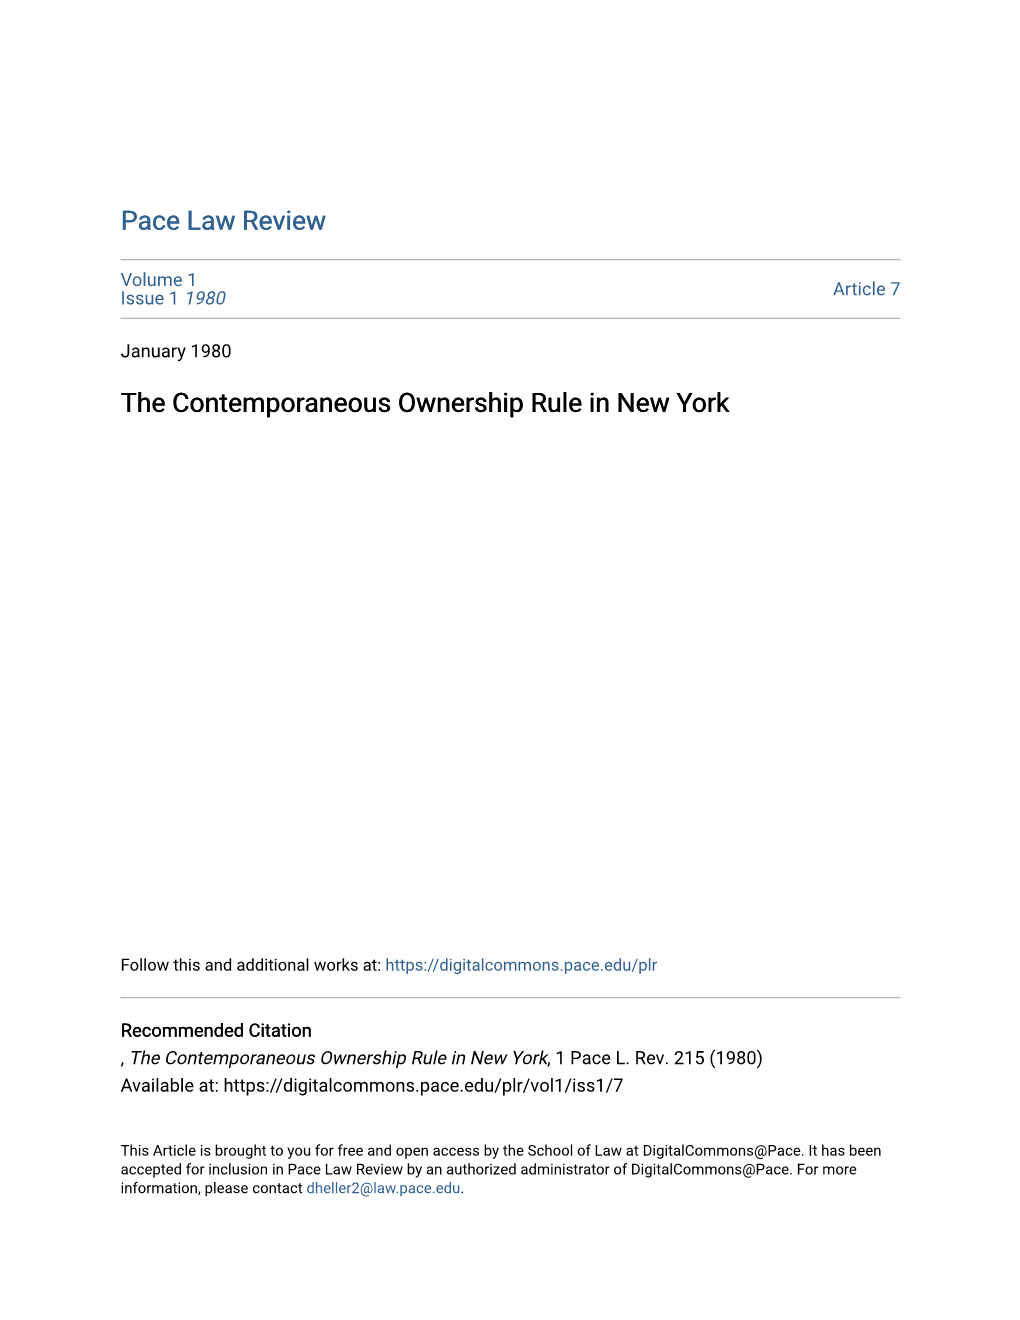 The Contemporaneous Ownership Rule in New York